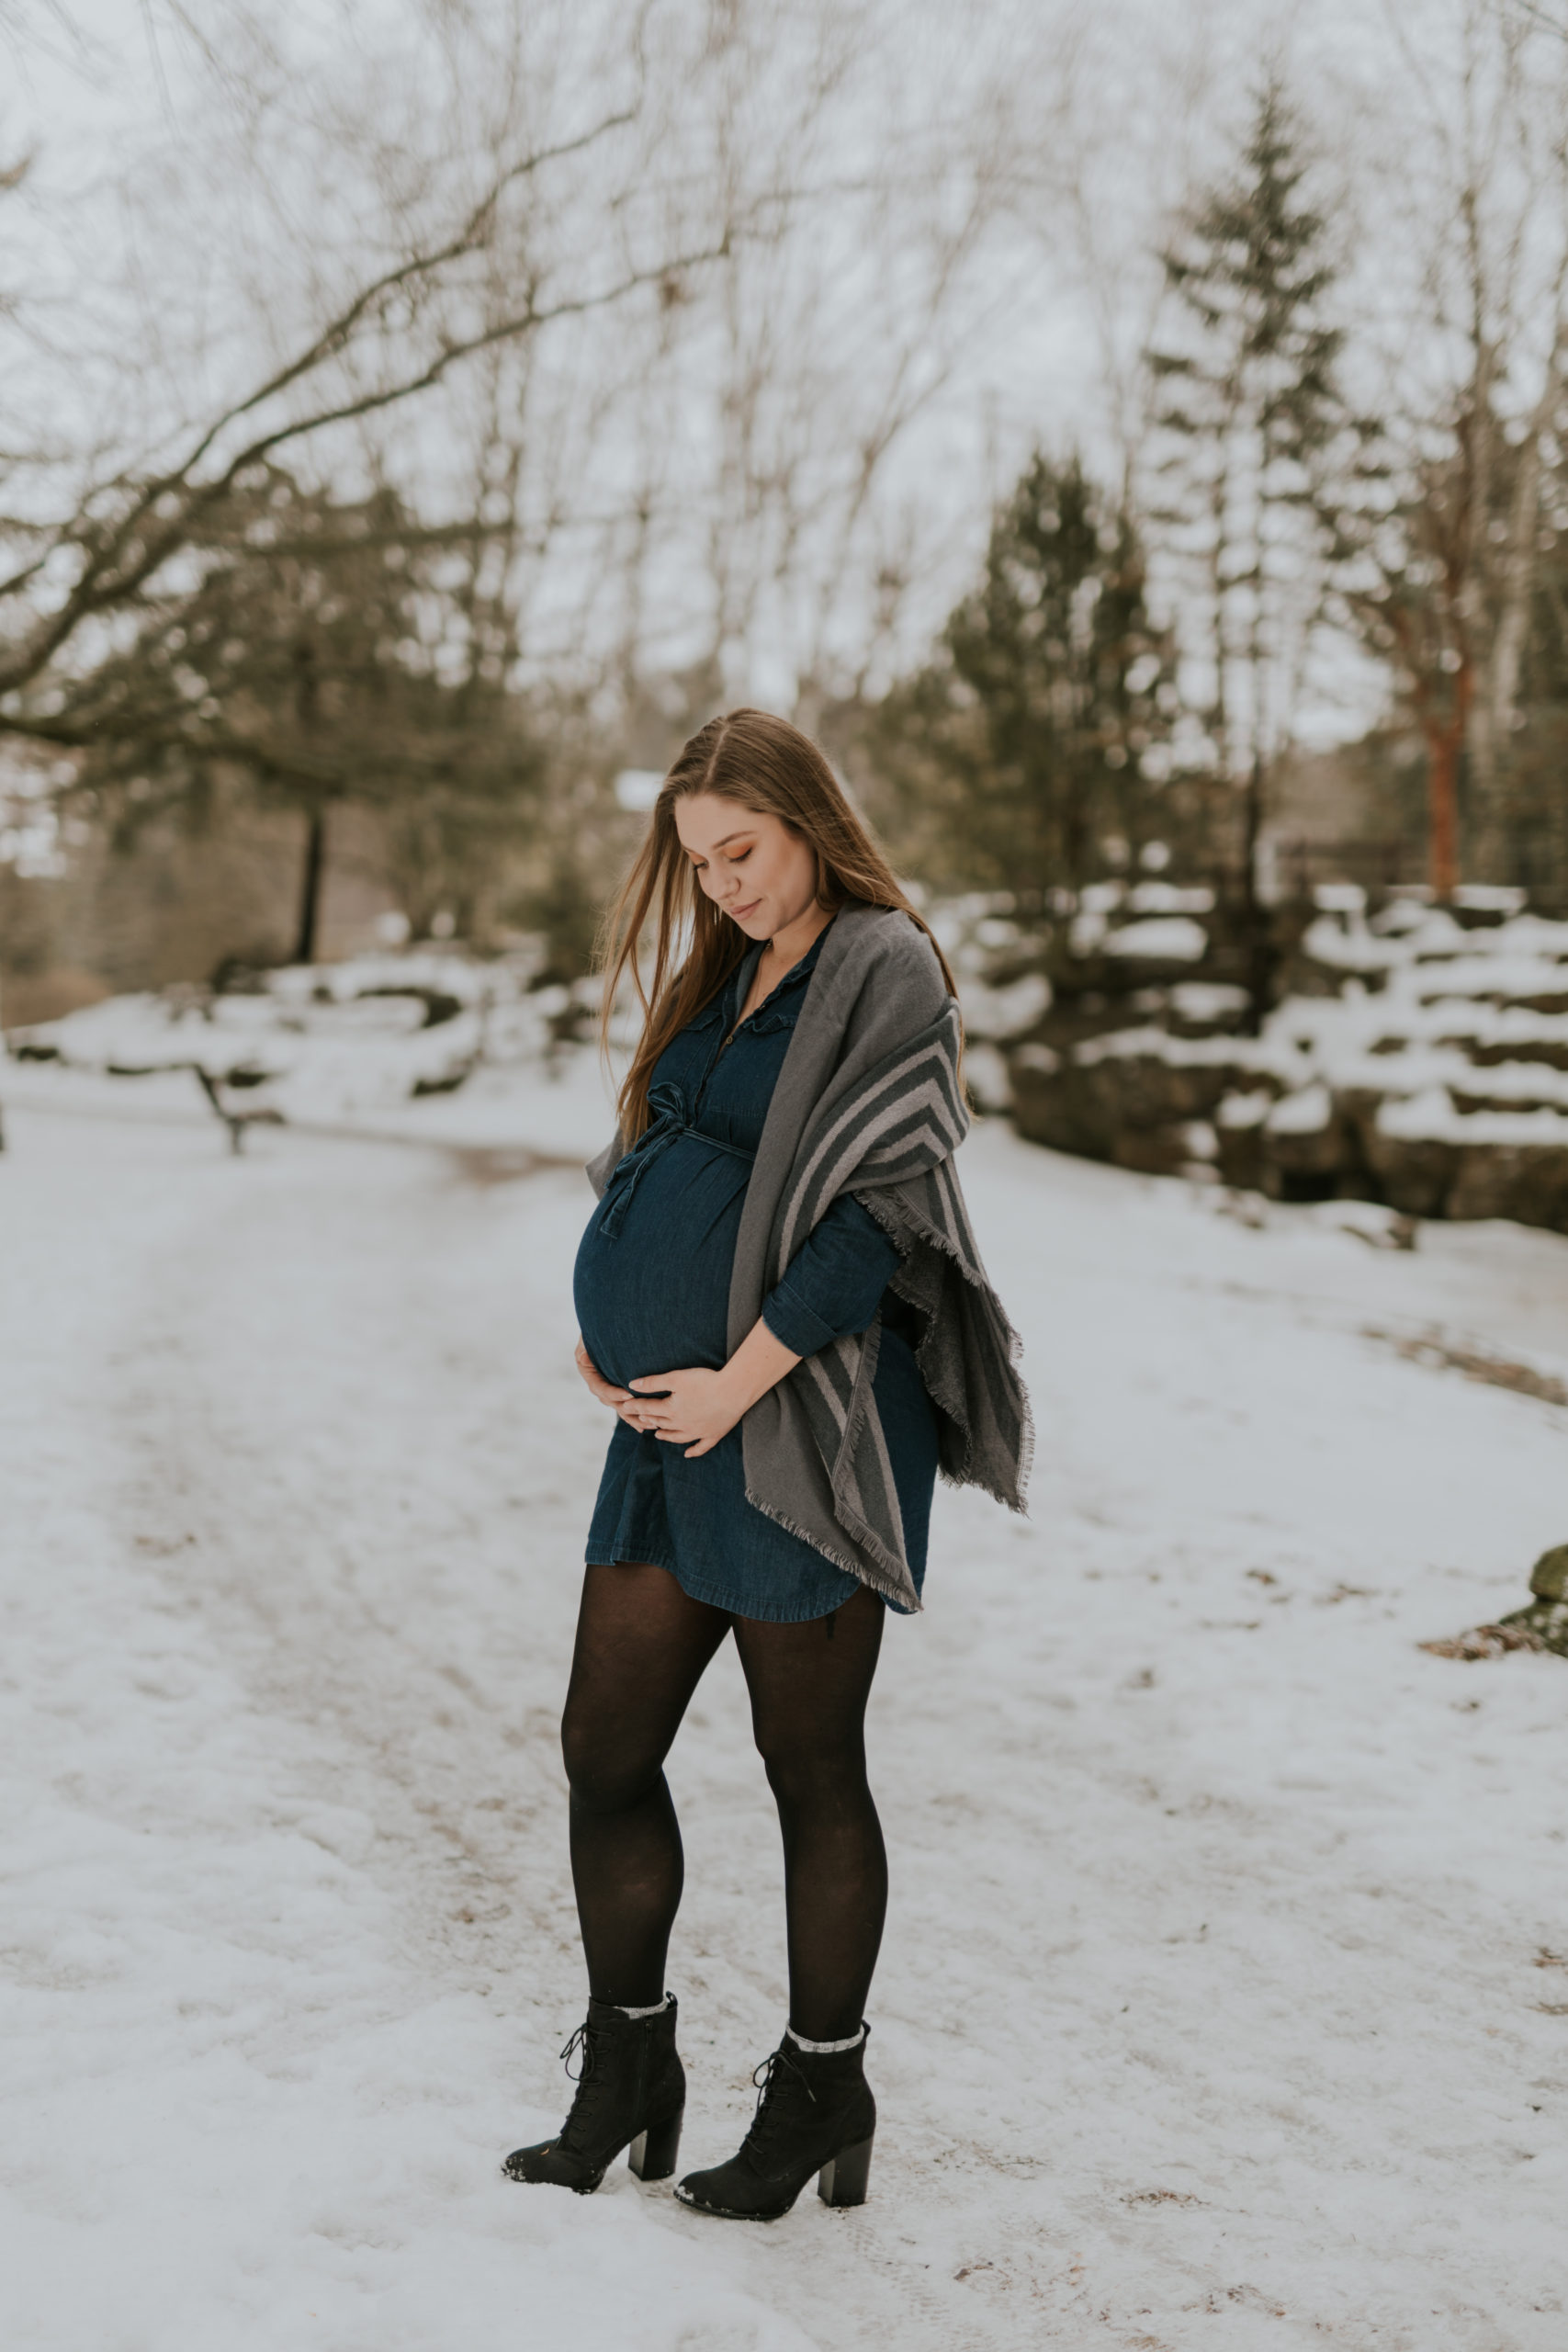 A new mom poses with her baby bump during a winter maternity session with Cara Gilhula Photography in Stratford, Ontario at Upper Queens Park